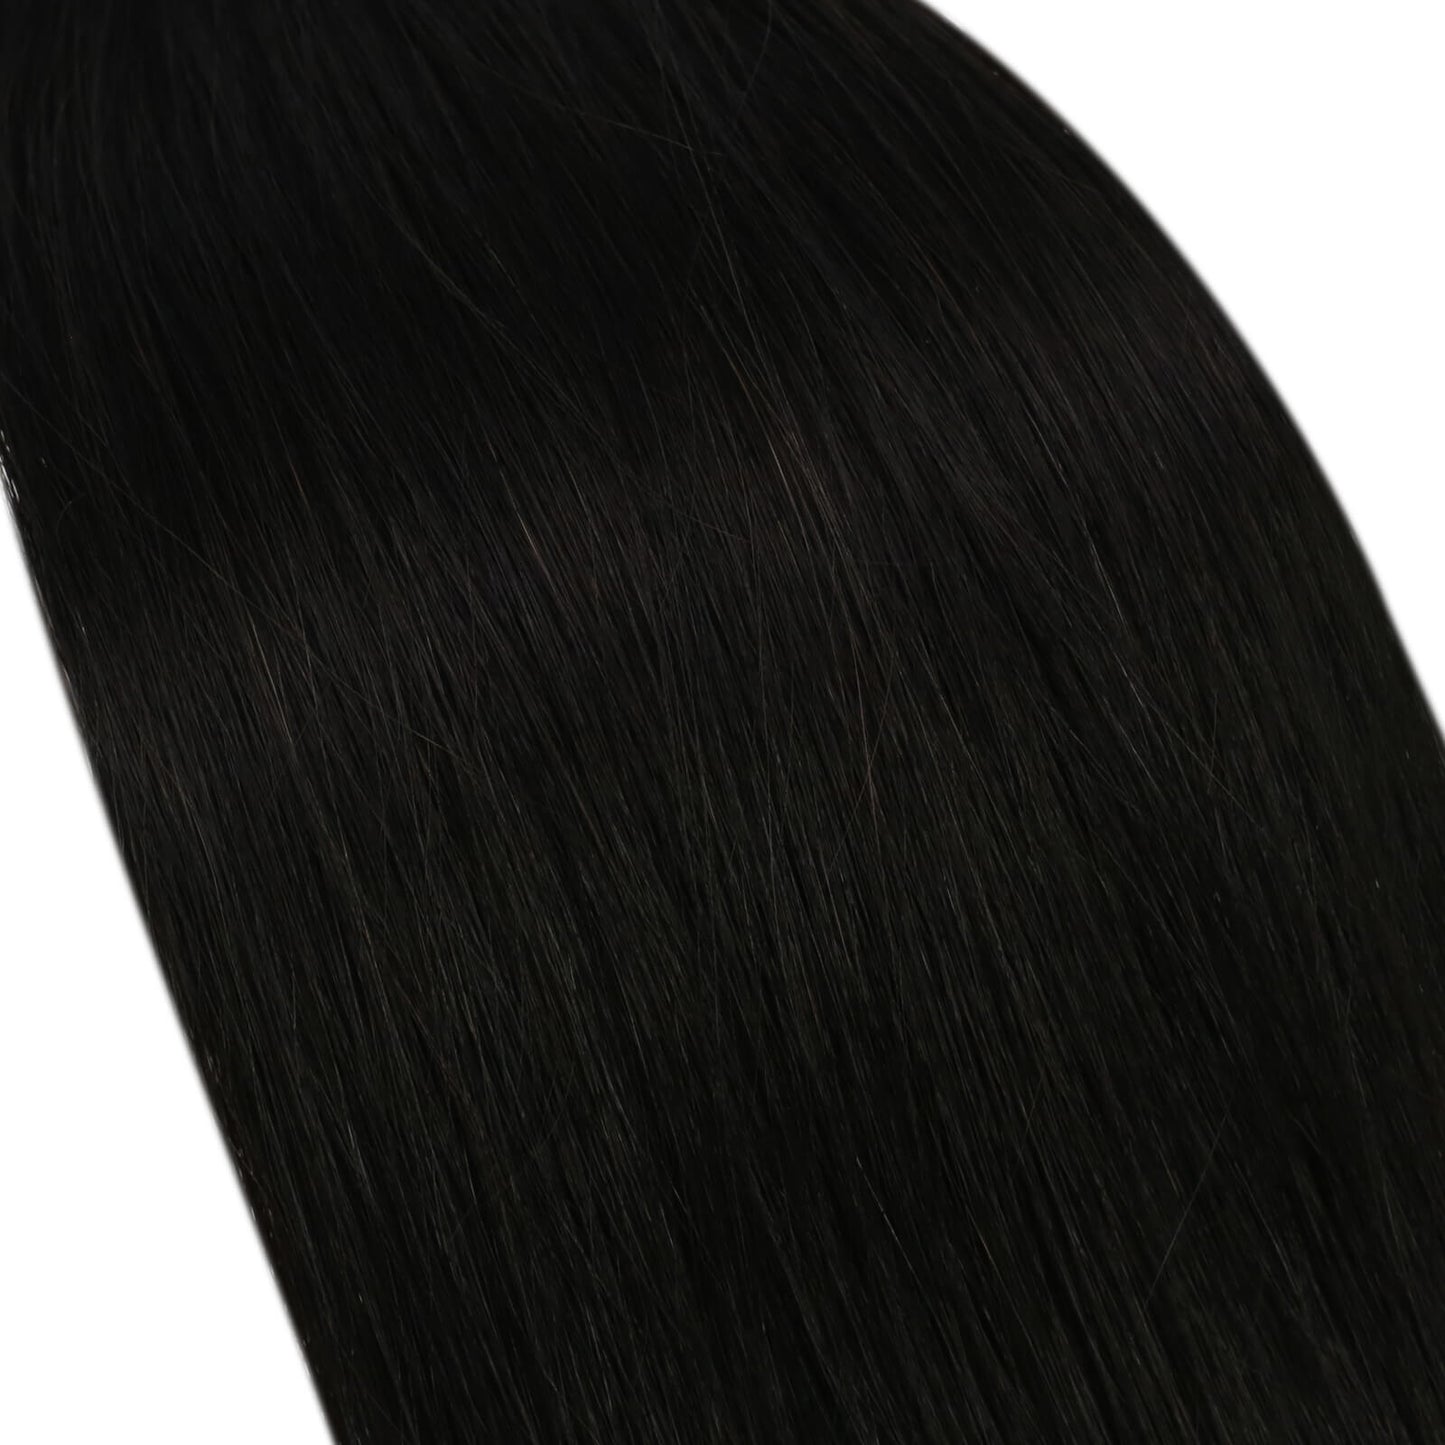 natural black genius weft hair extensions rofessional hair extensions wholesale supplier